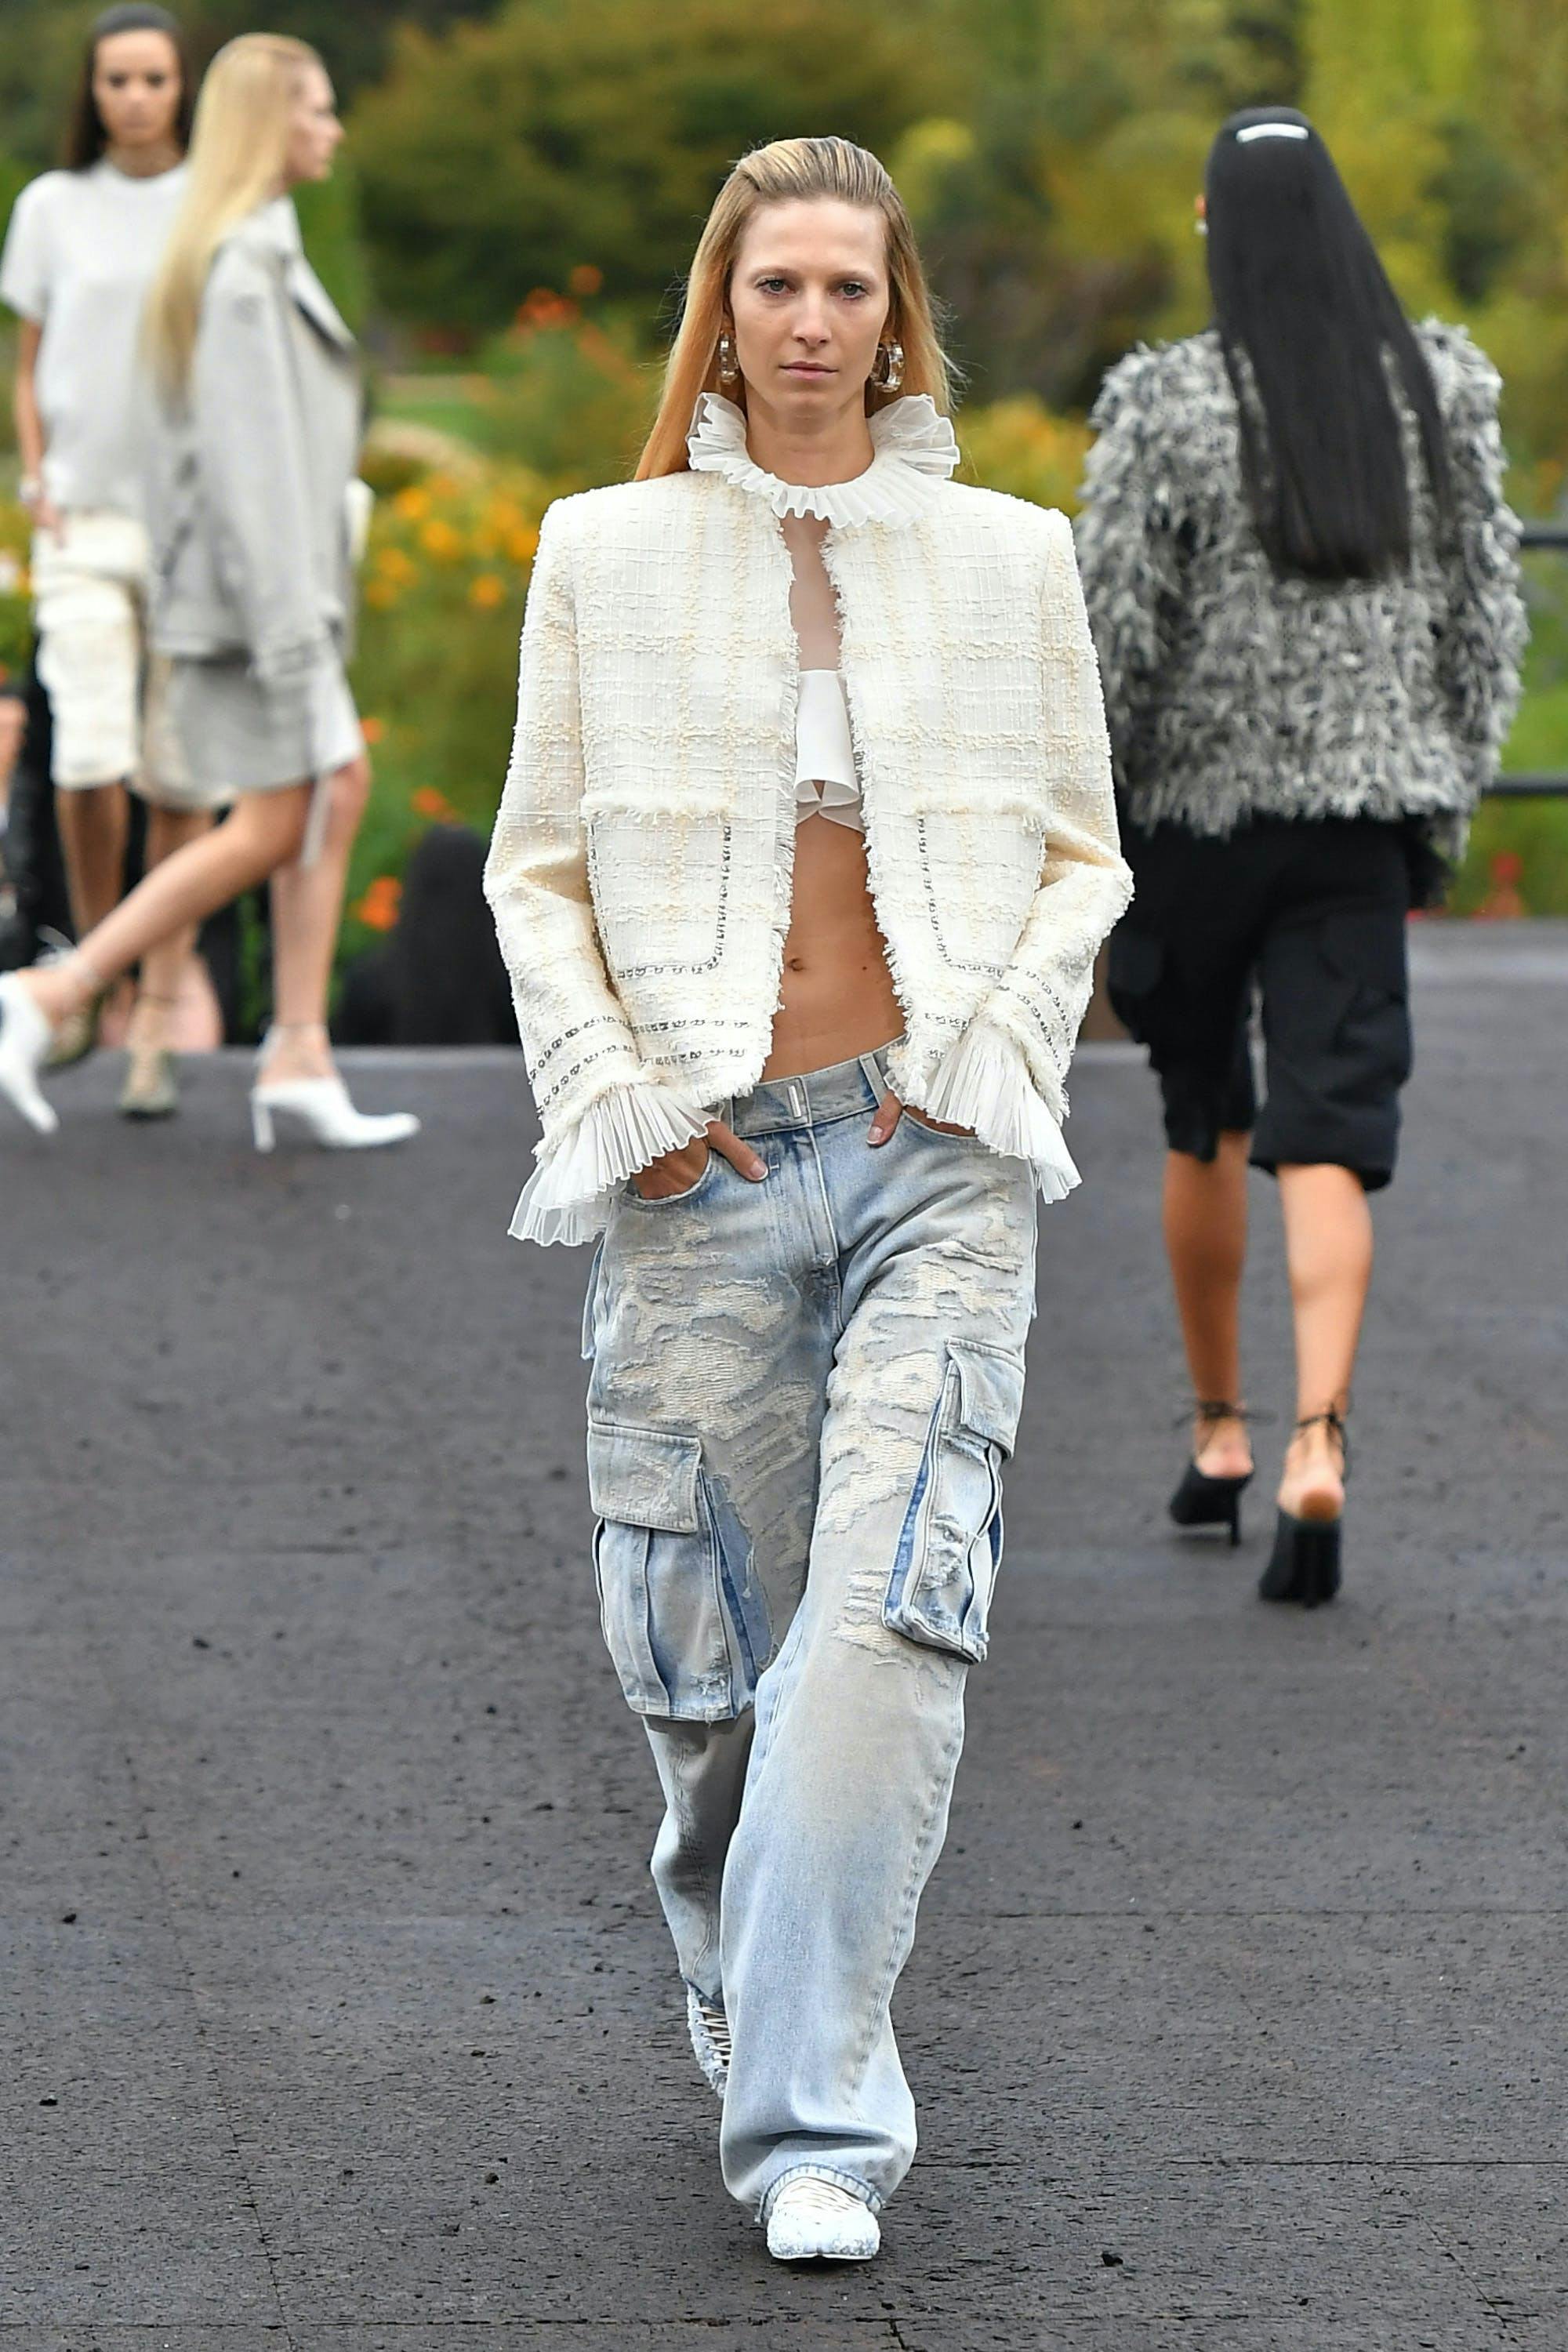 A model in a white jacket and baggy blue jeans.